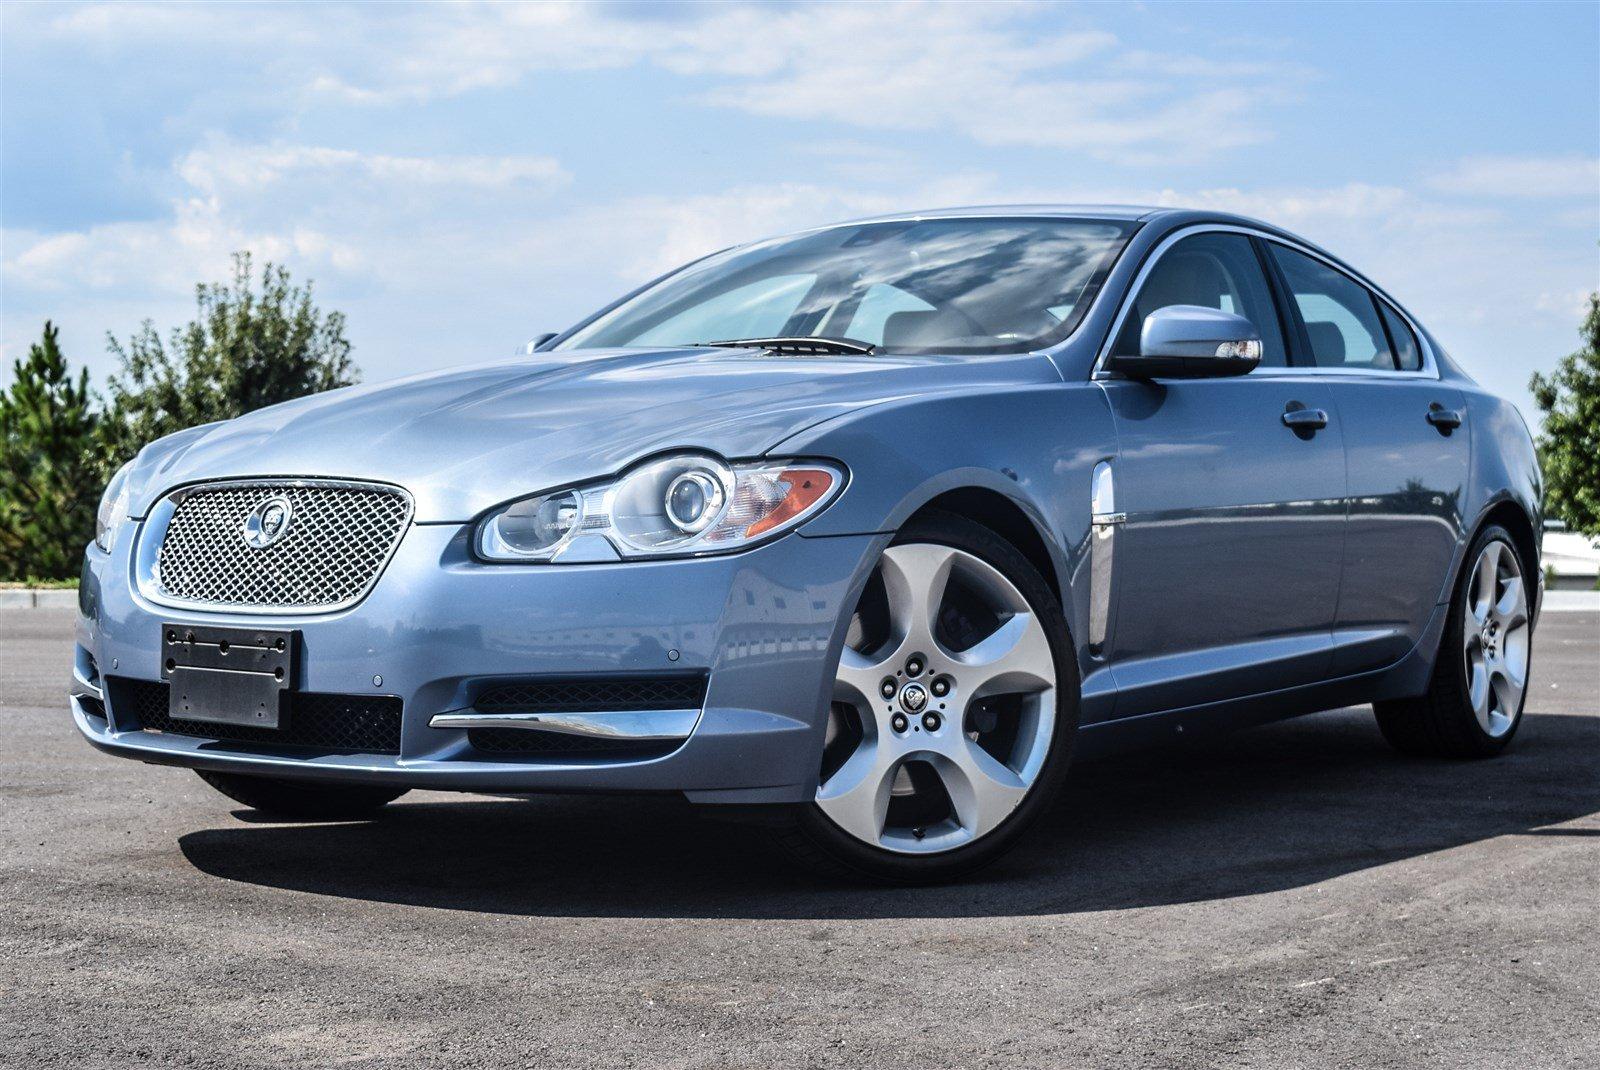 Used 2009 Jaguar XF Supercharged for sale Sold at Gravity Autos Marietta in Marietta GA 30060 20